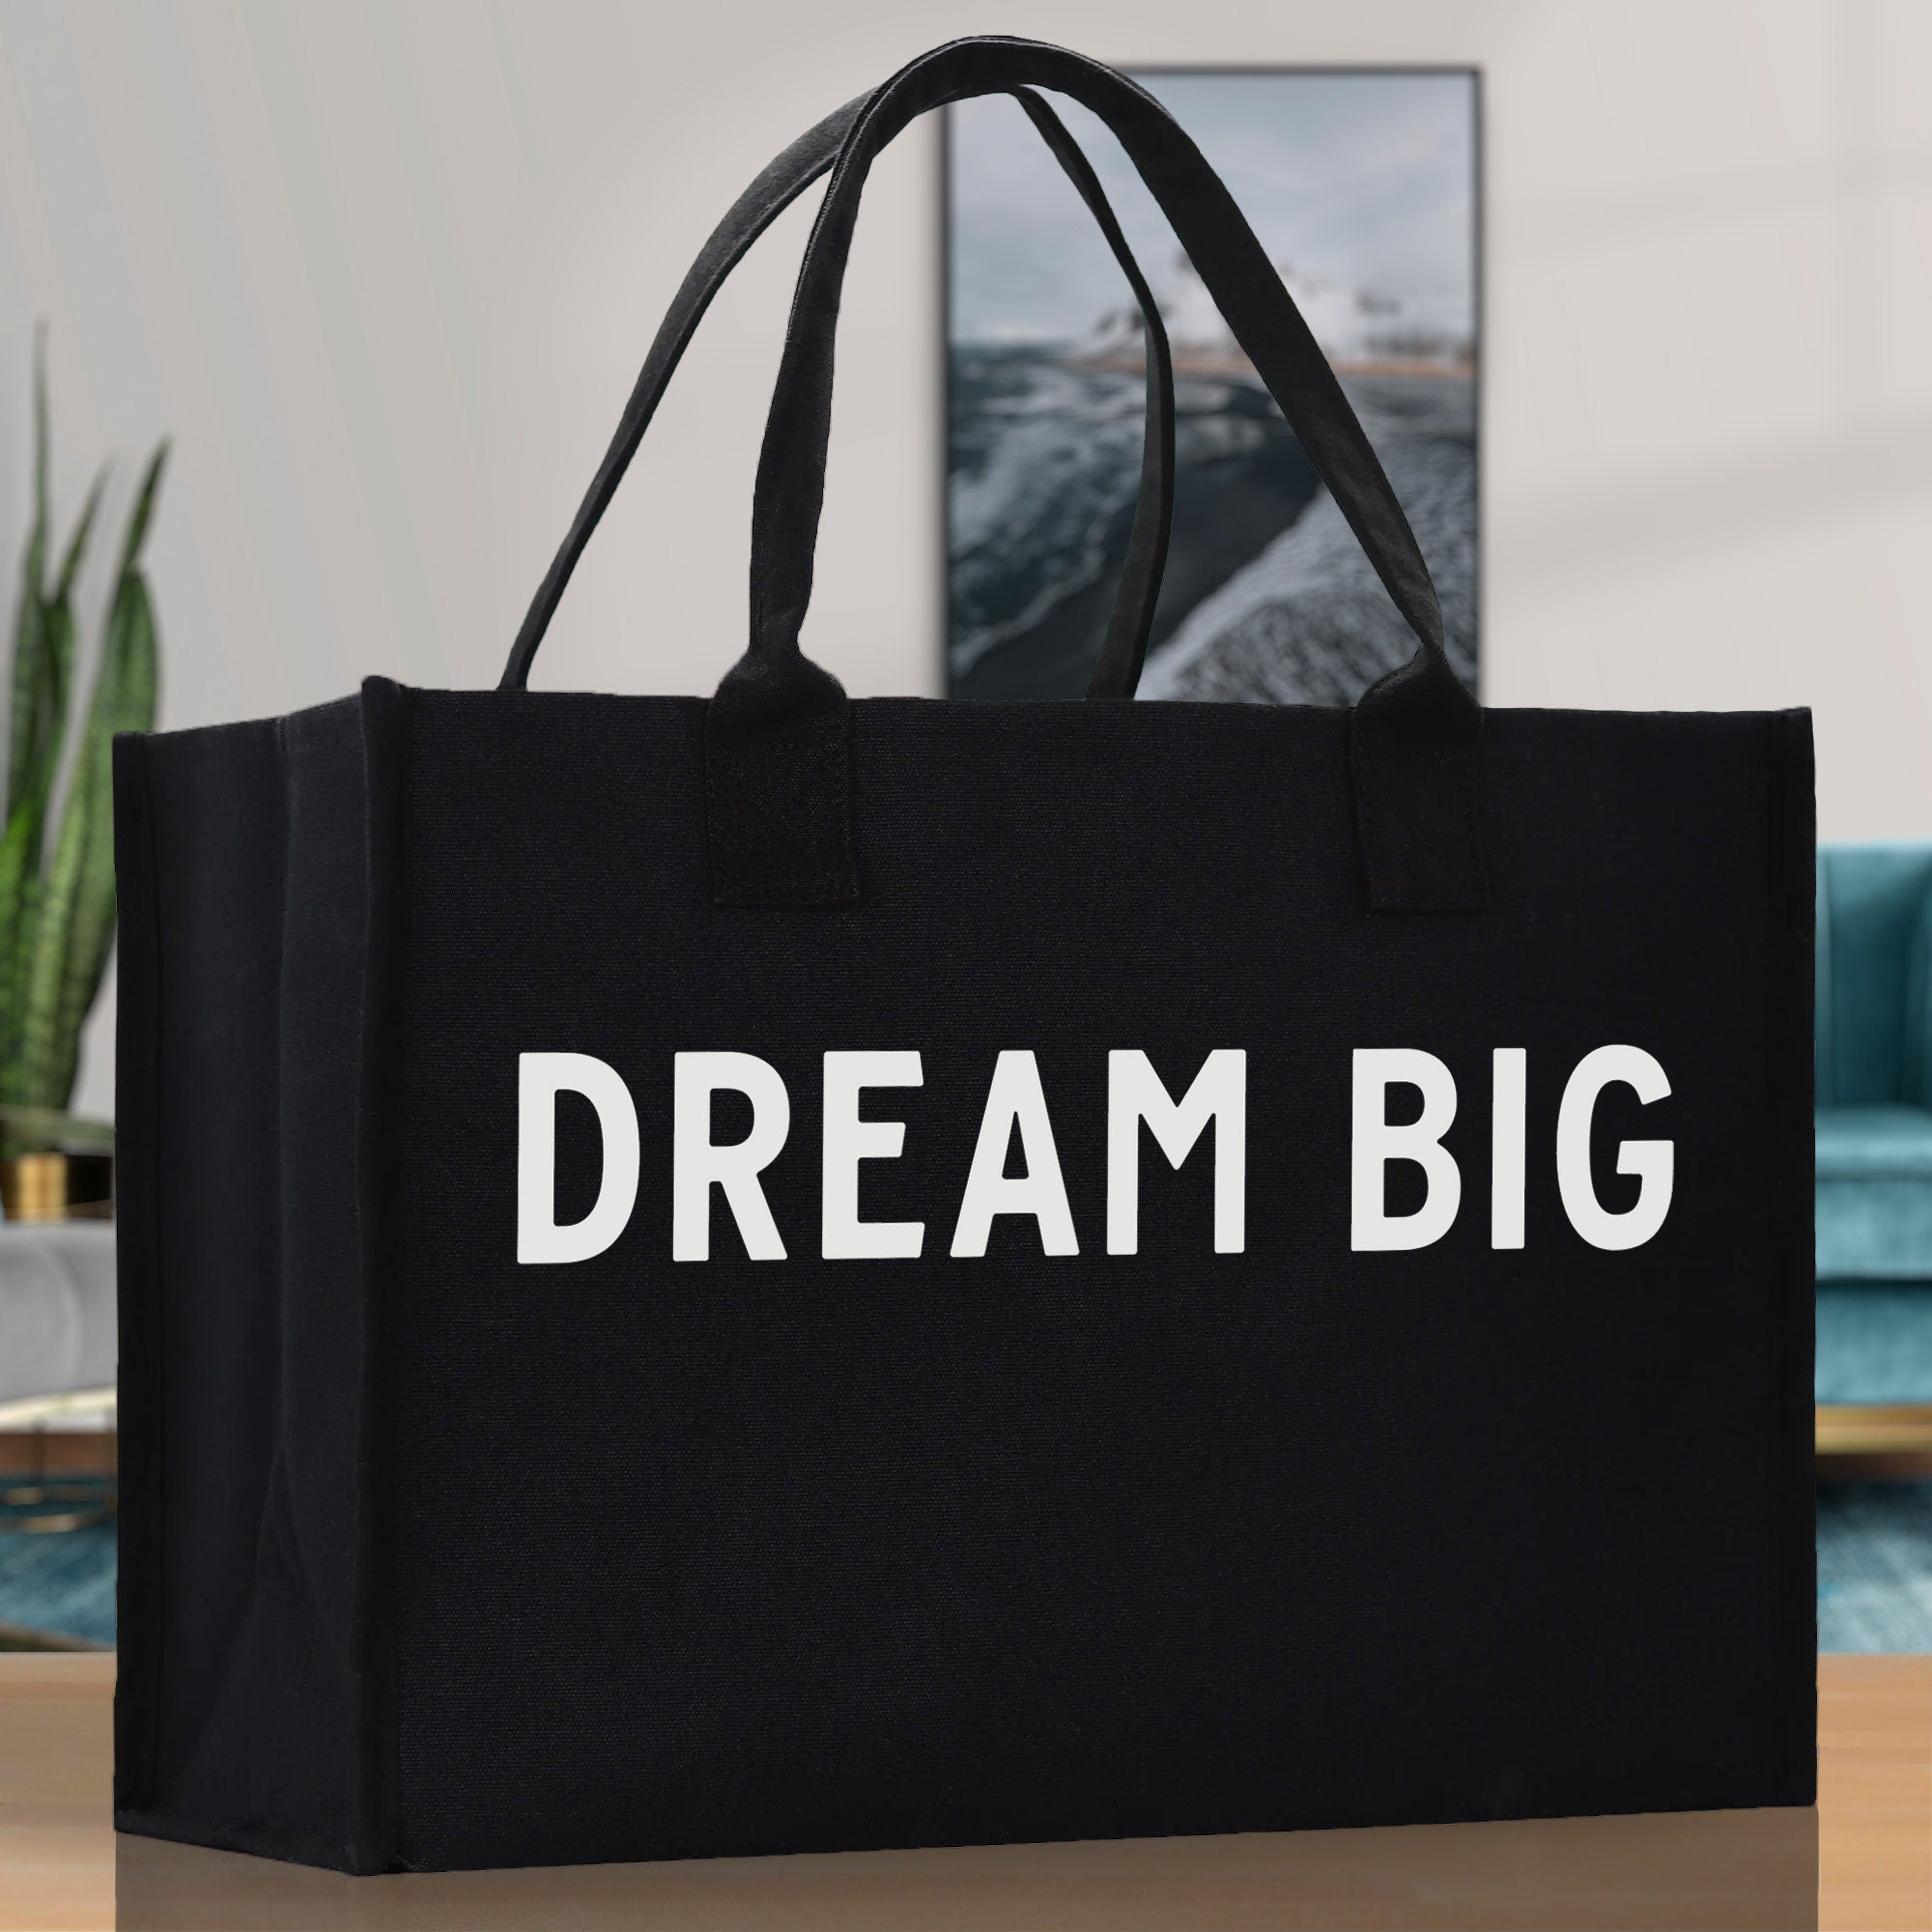 Dream Big Cotton Canvas Chic Beach Tote Bag Multipurpose Tote Weekender Tote Gift for Her Outdoor Tote Vacation Tote Large Beach Bag